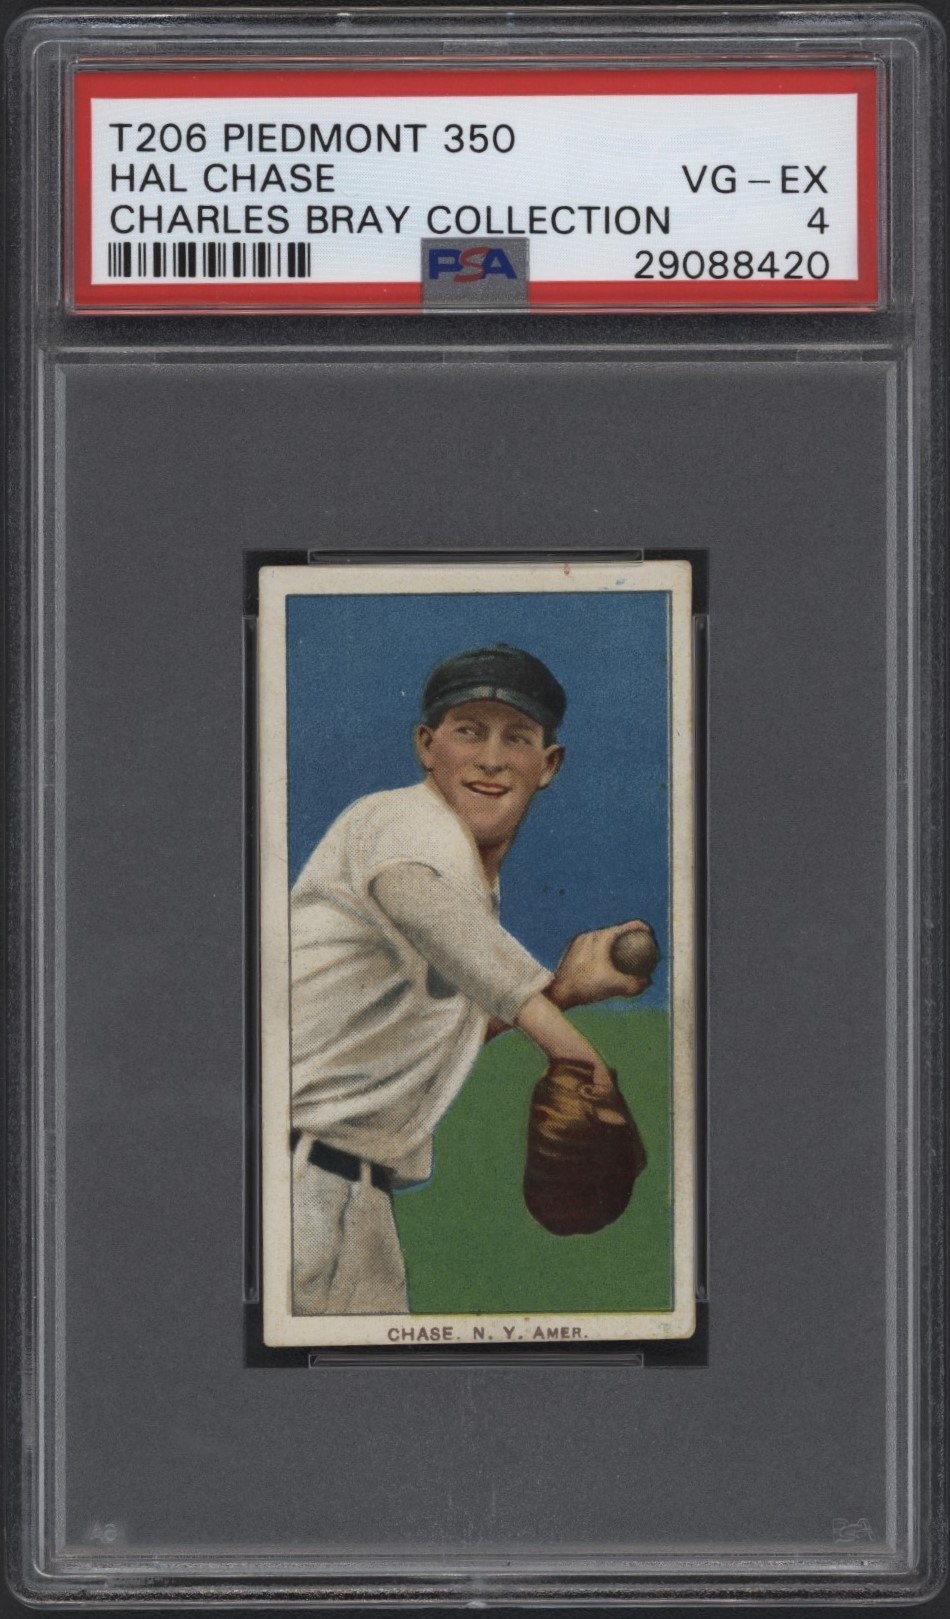 Baseball and Trading Cards - T206 Piedmont 350 Hal Chase PSA VG-EX 4 From the Charles Bray Collection.